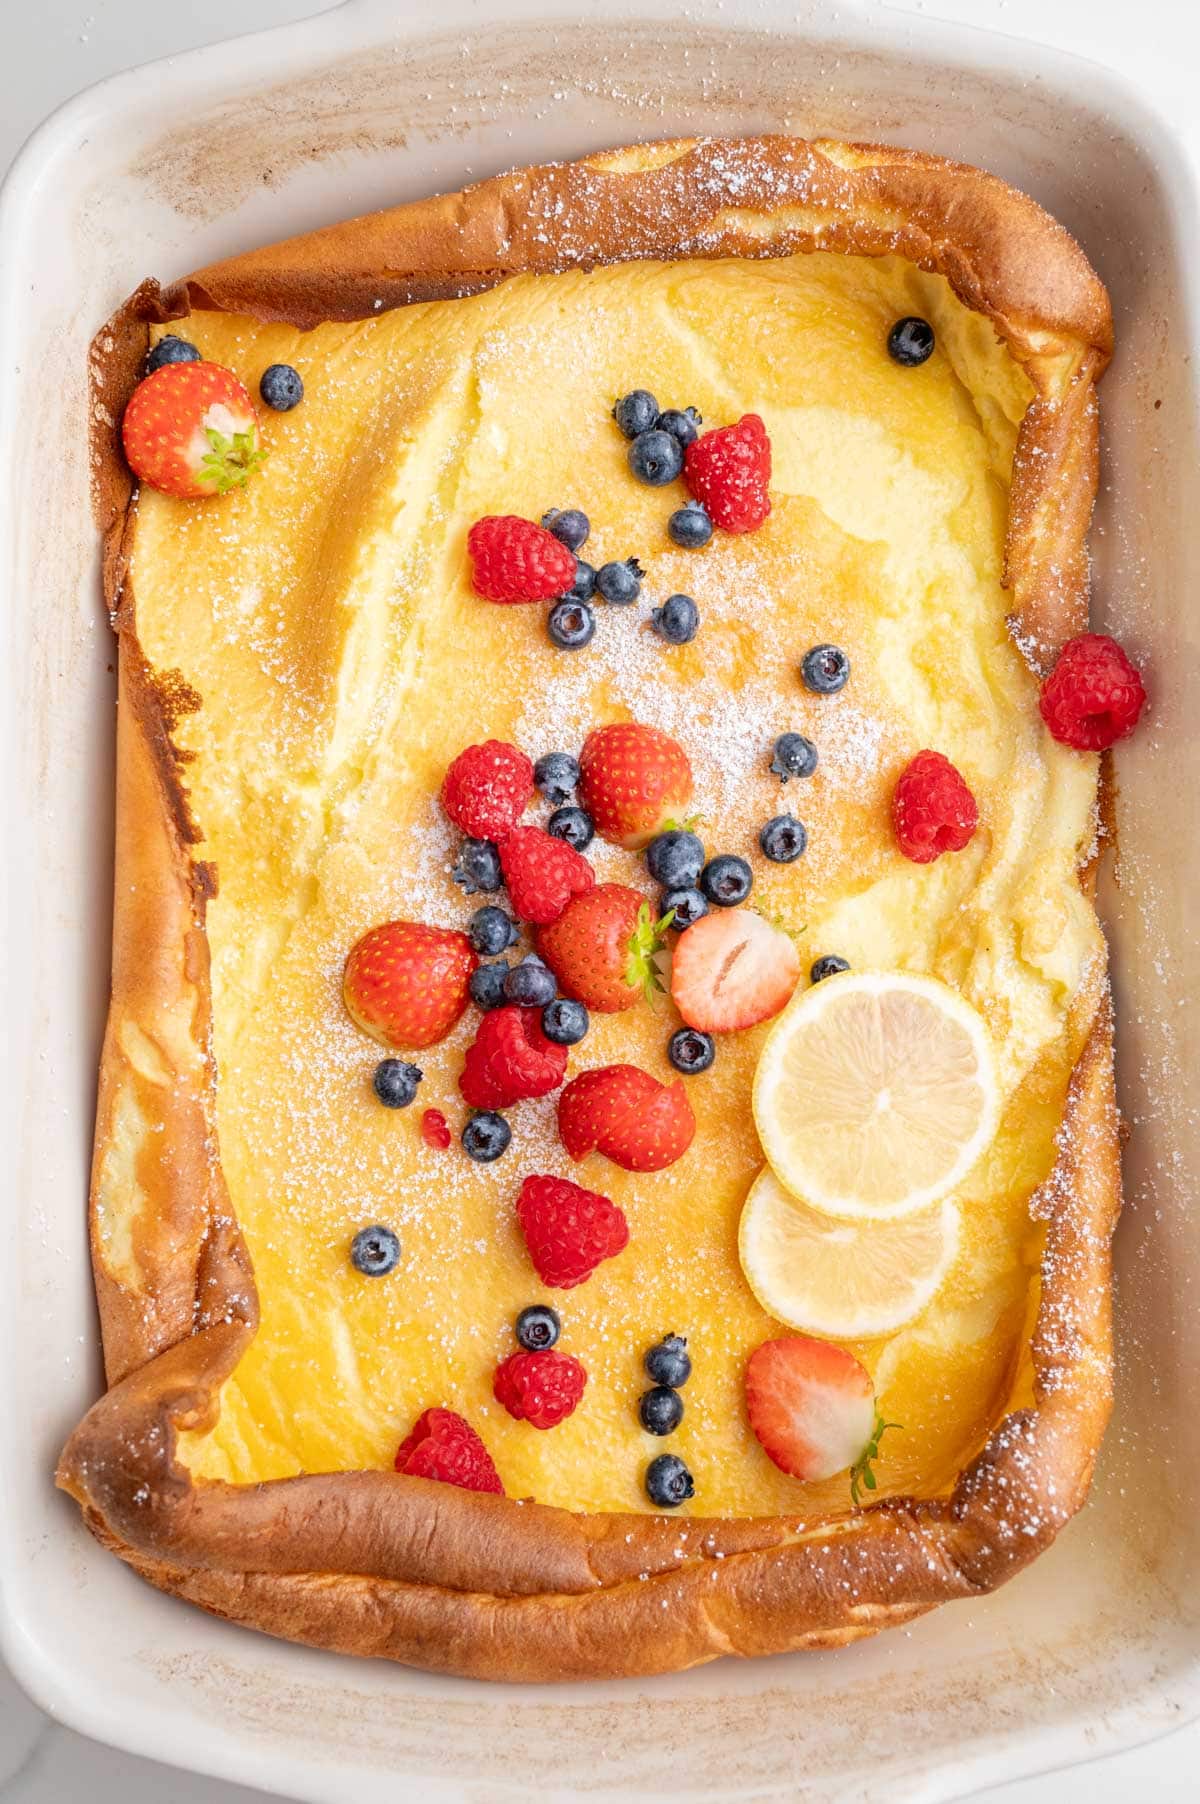 Dutch baby pancake in a white casserole dish topped with berries and lemon slices.